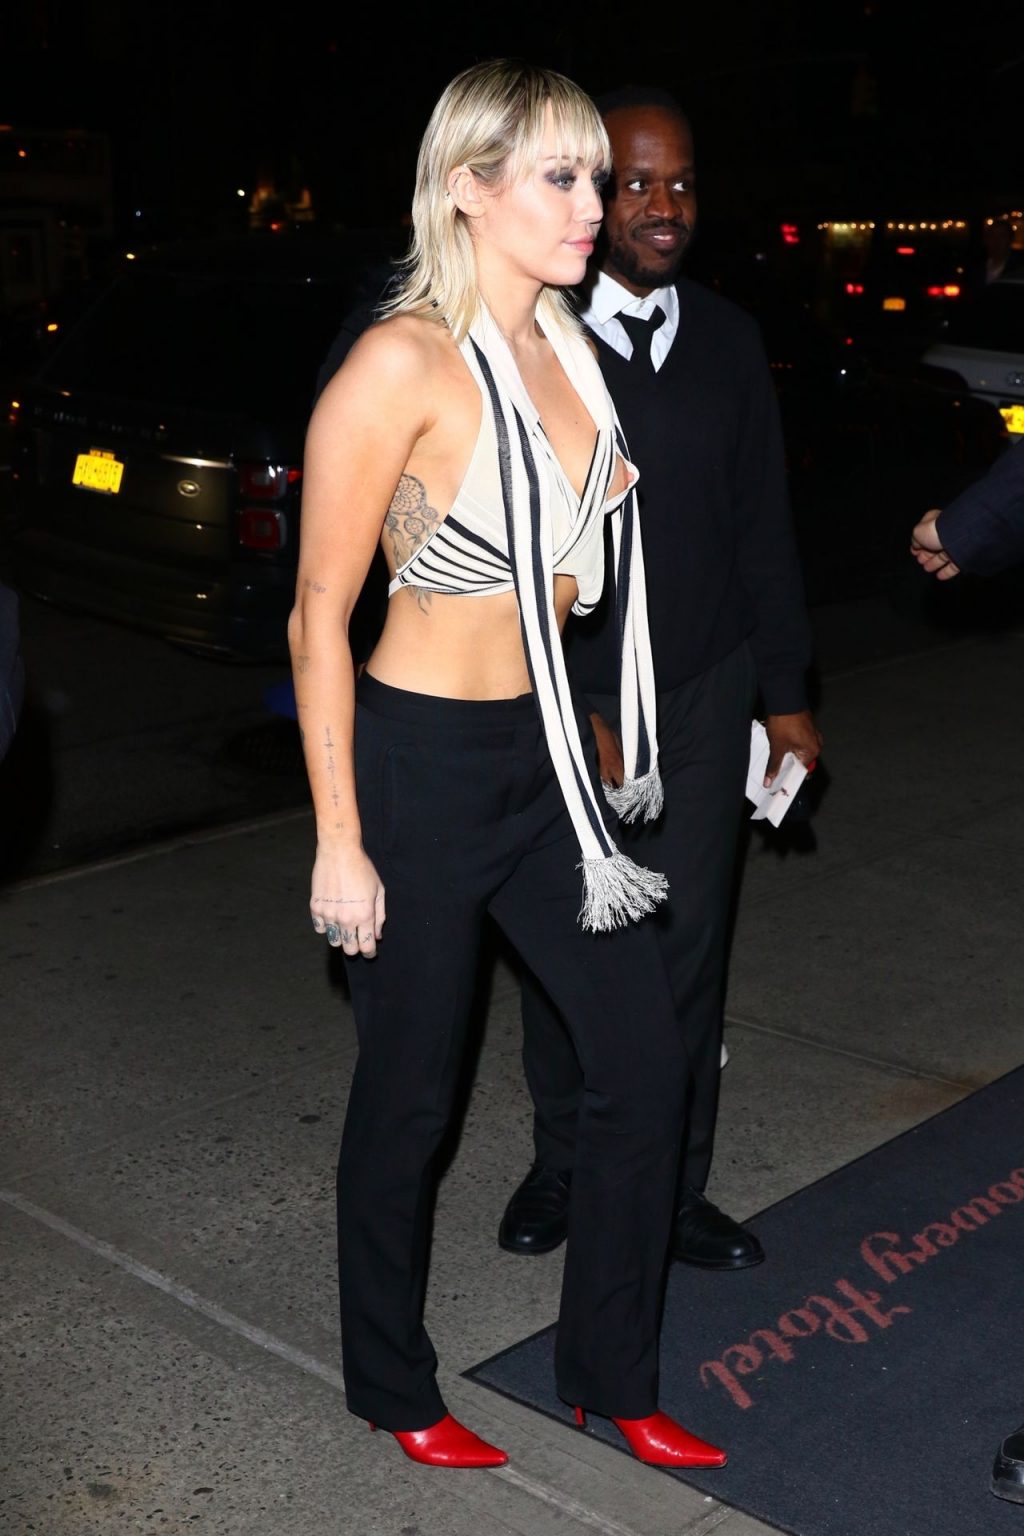 Miley Cyrus is Very Revealing After Marc Jacobs Fashion Show in NYC (204 New Photos)